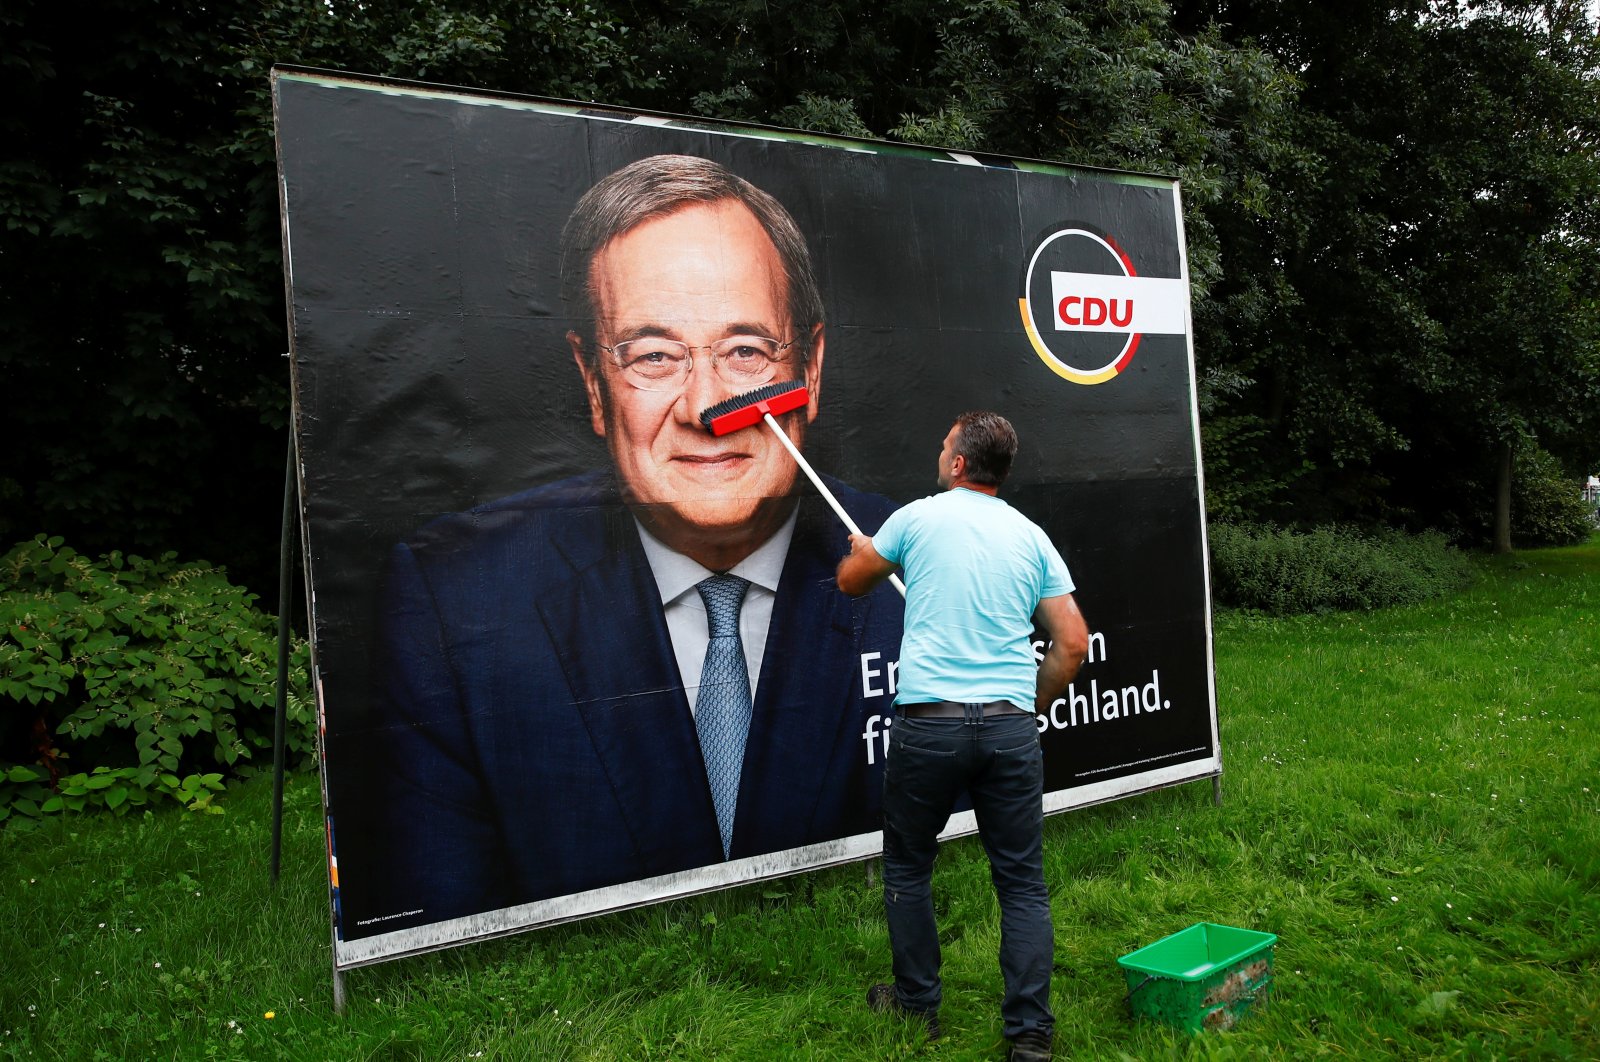 A placard of Armin Laschet, the Christian Democratic Union's (CDU) candidate for chancellor, is placed on a board for the Sept. 26 German general elections in Bonn, Germany, Sept. 20, 2021. (Reuters Photo)